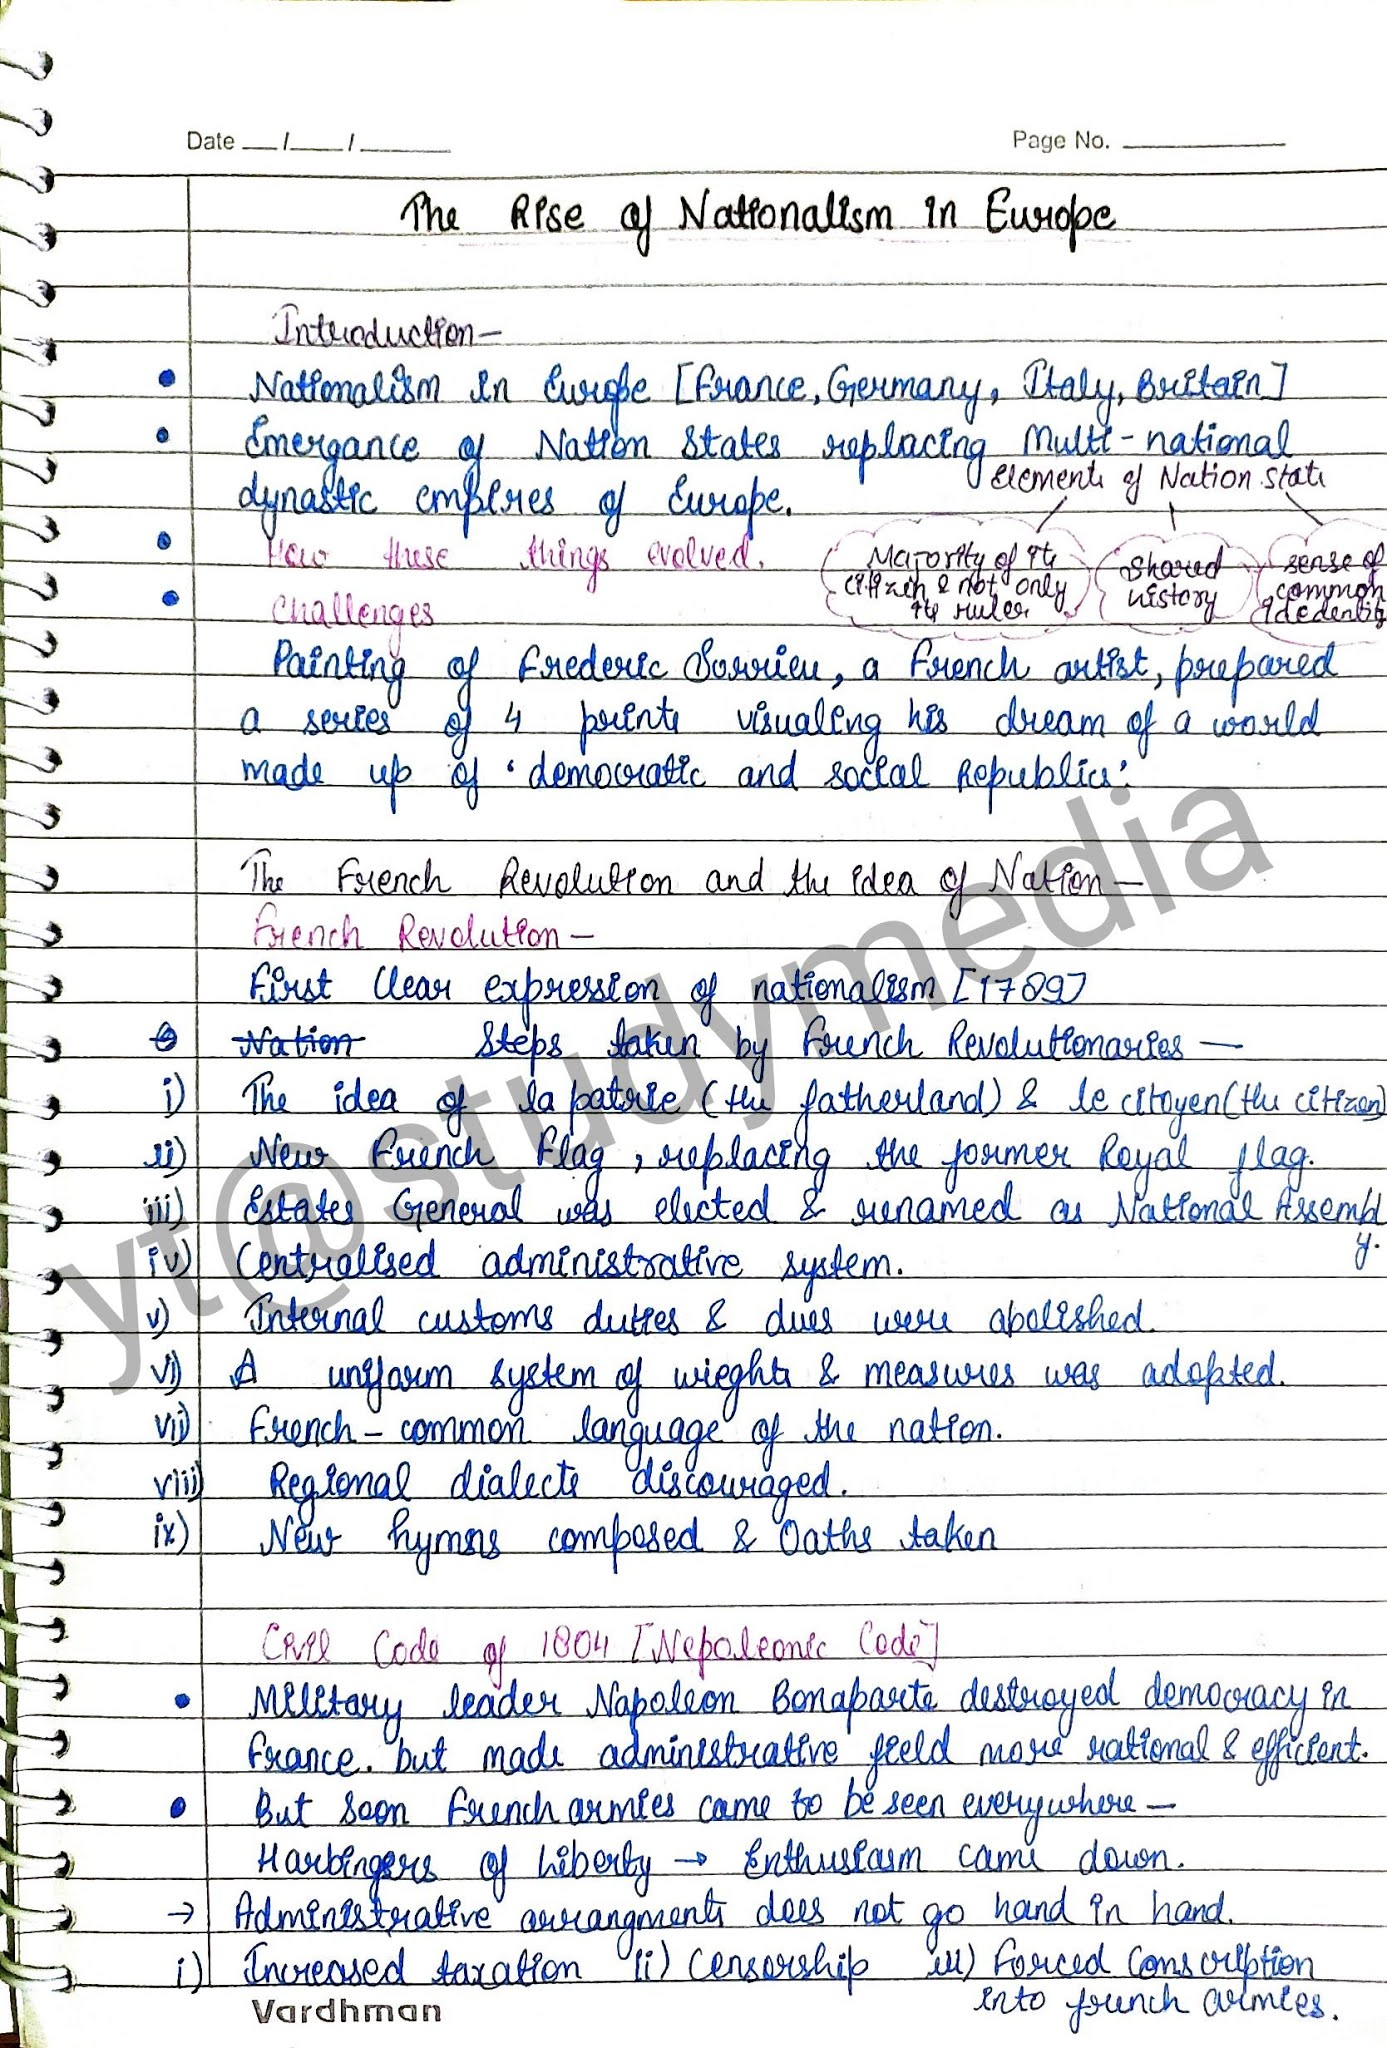 CBSE Class 10 History Notes Chapter 1 - The Rise of Nationalism in Europe.